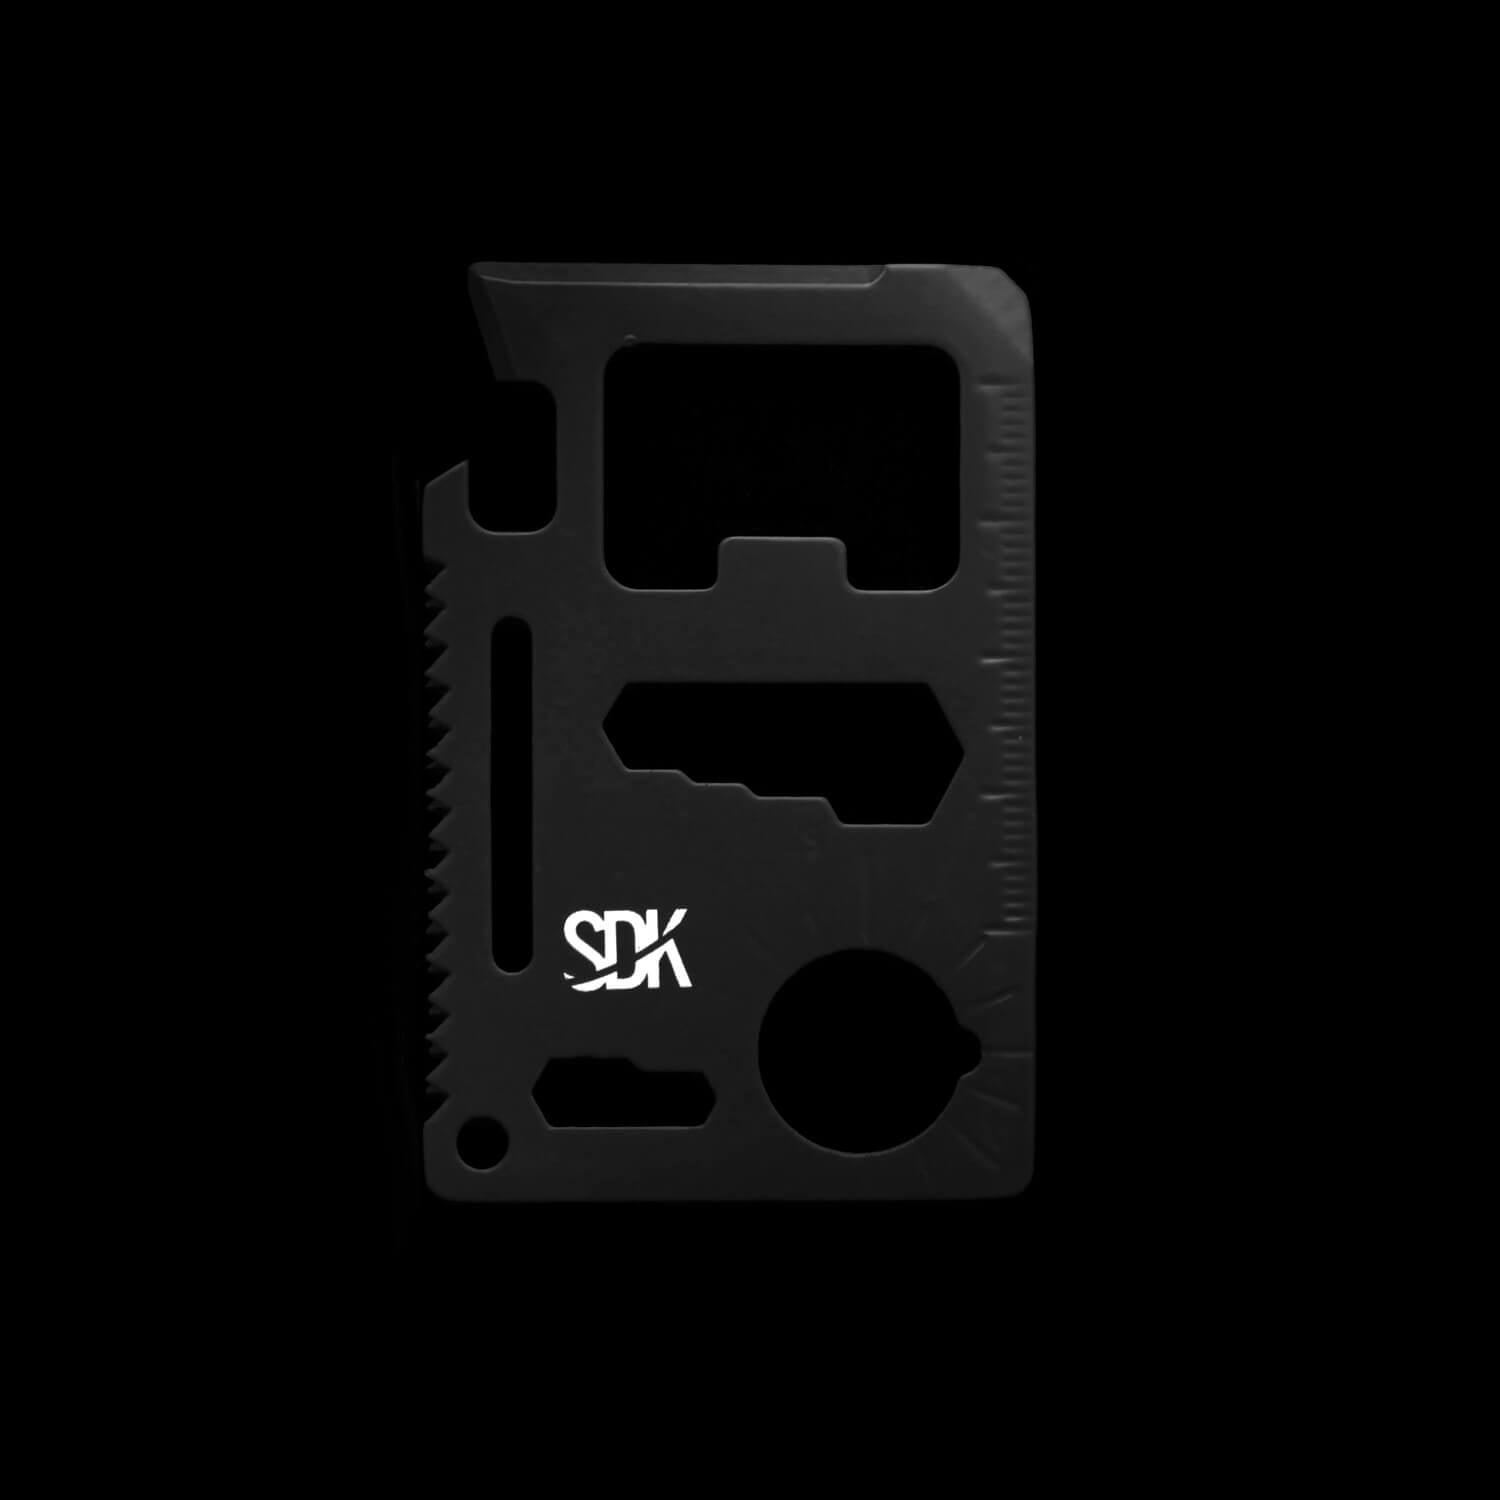 SDK Multi Card Tool, Black (credit card sized stainless steel tool with 10 functions: Can opener, Knife edge, Screwdriver, Ruler, Cap opener, 2 Position wrench, 4 Position wrench, Butterfly wrench, Saw blade and Direction ancillary indication)